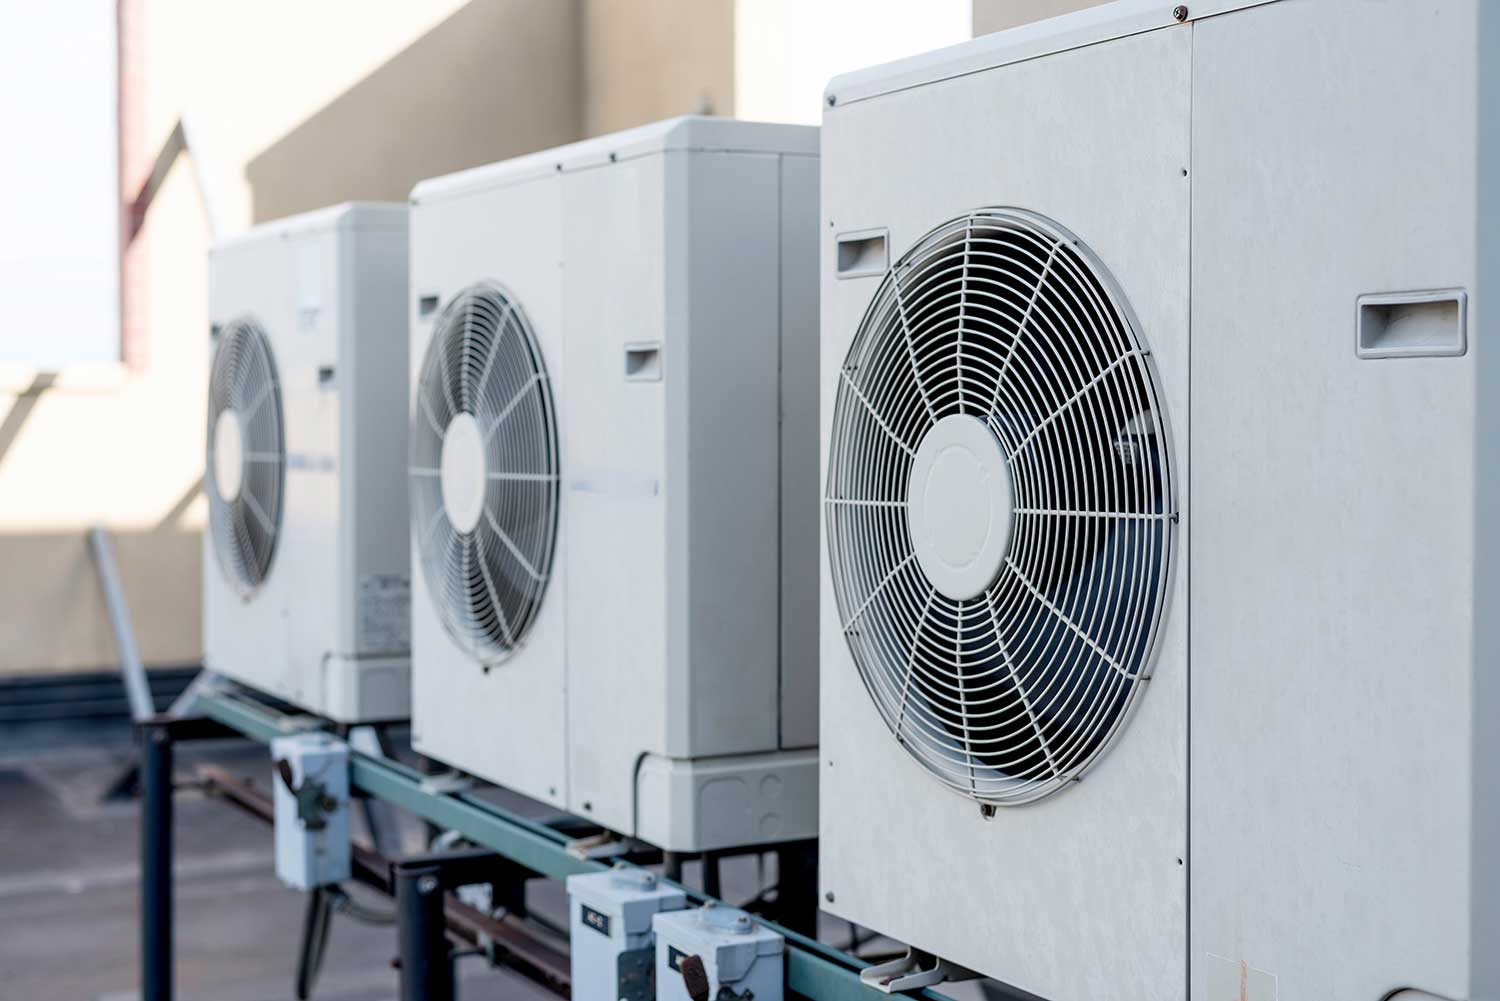 Replacing an Heating and Air Conditioning system for saving, efficiency and consistent cooling